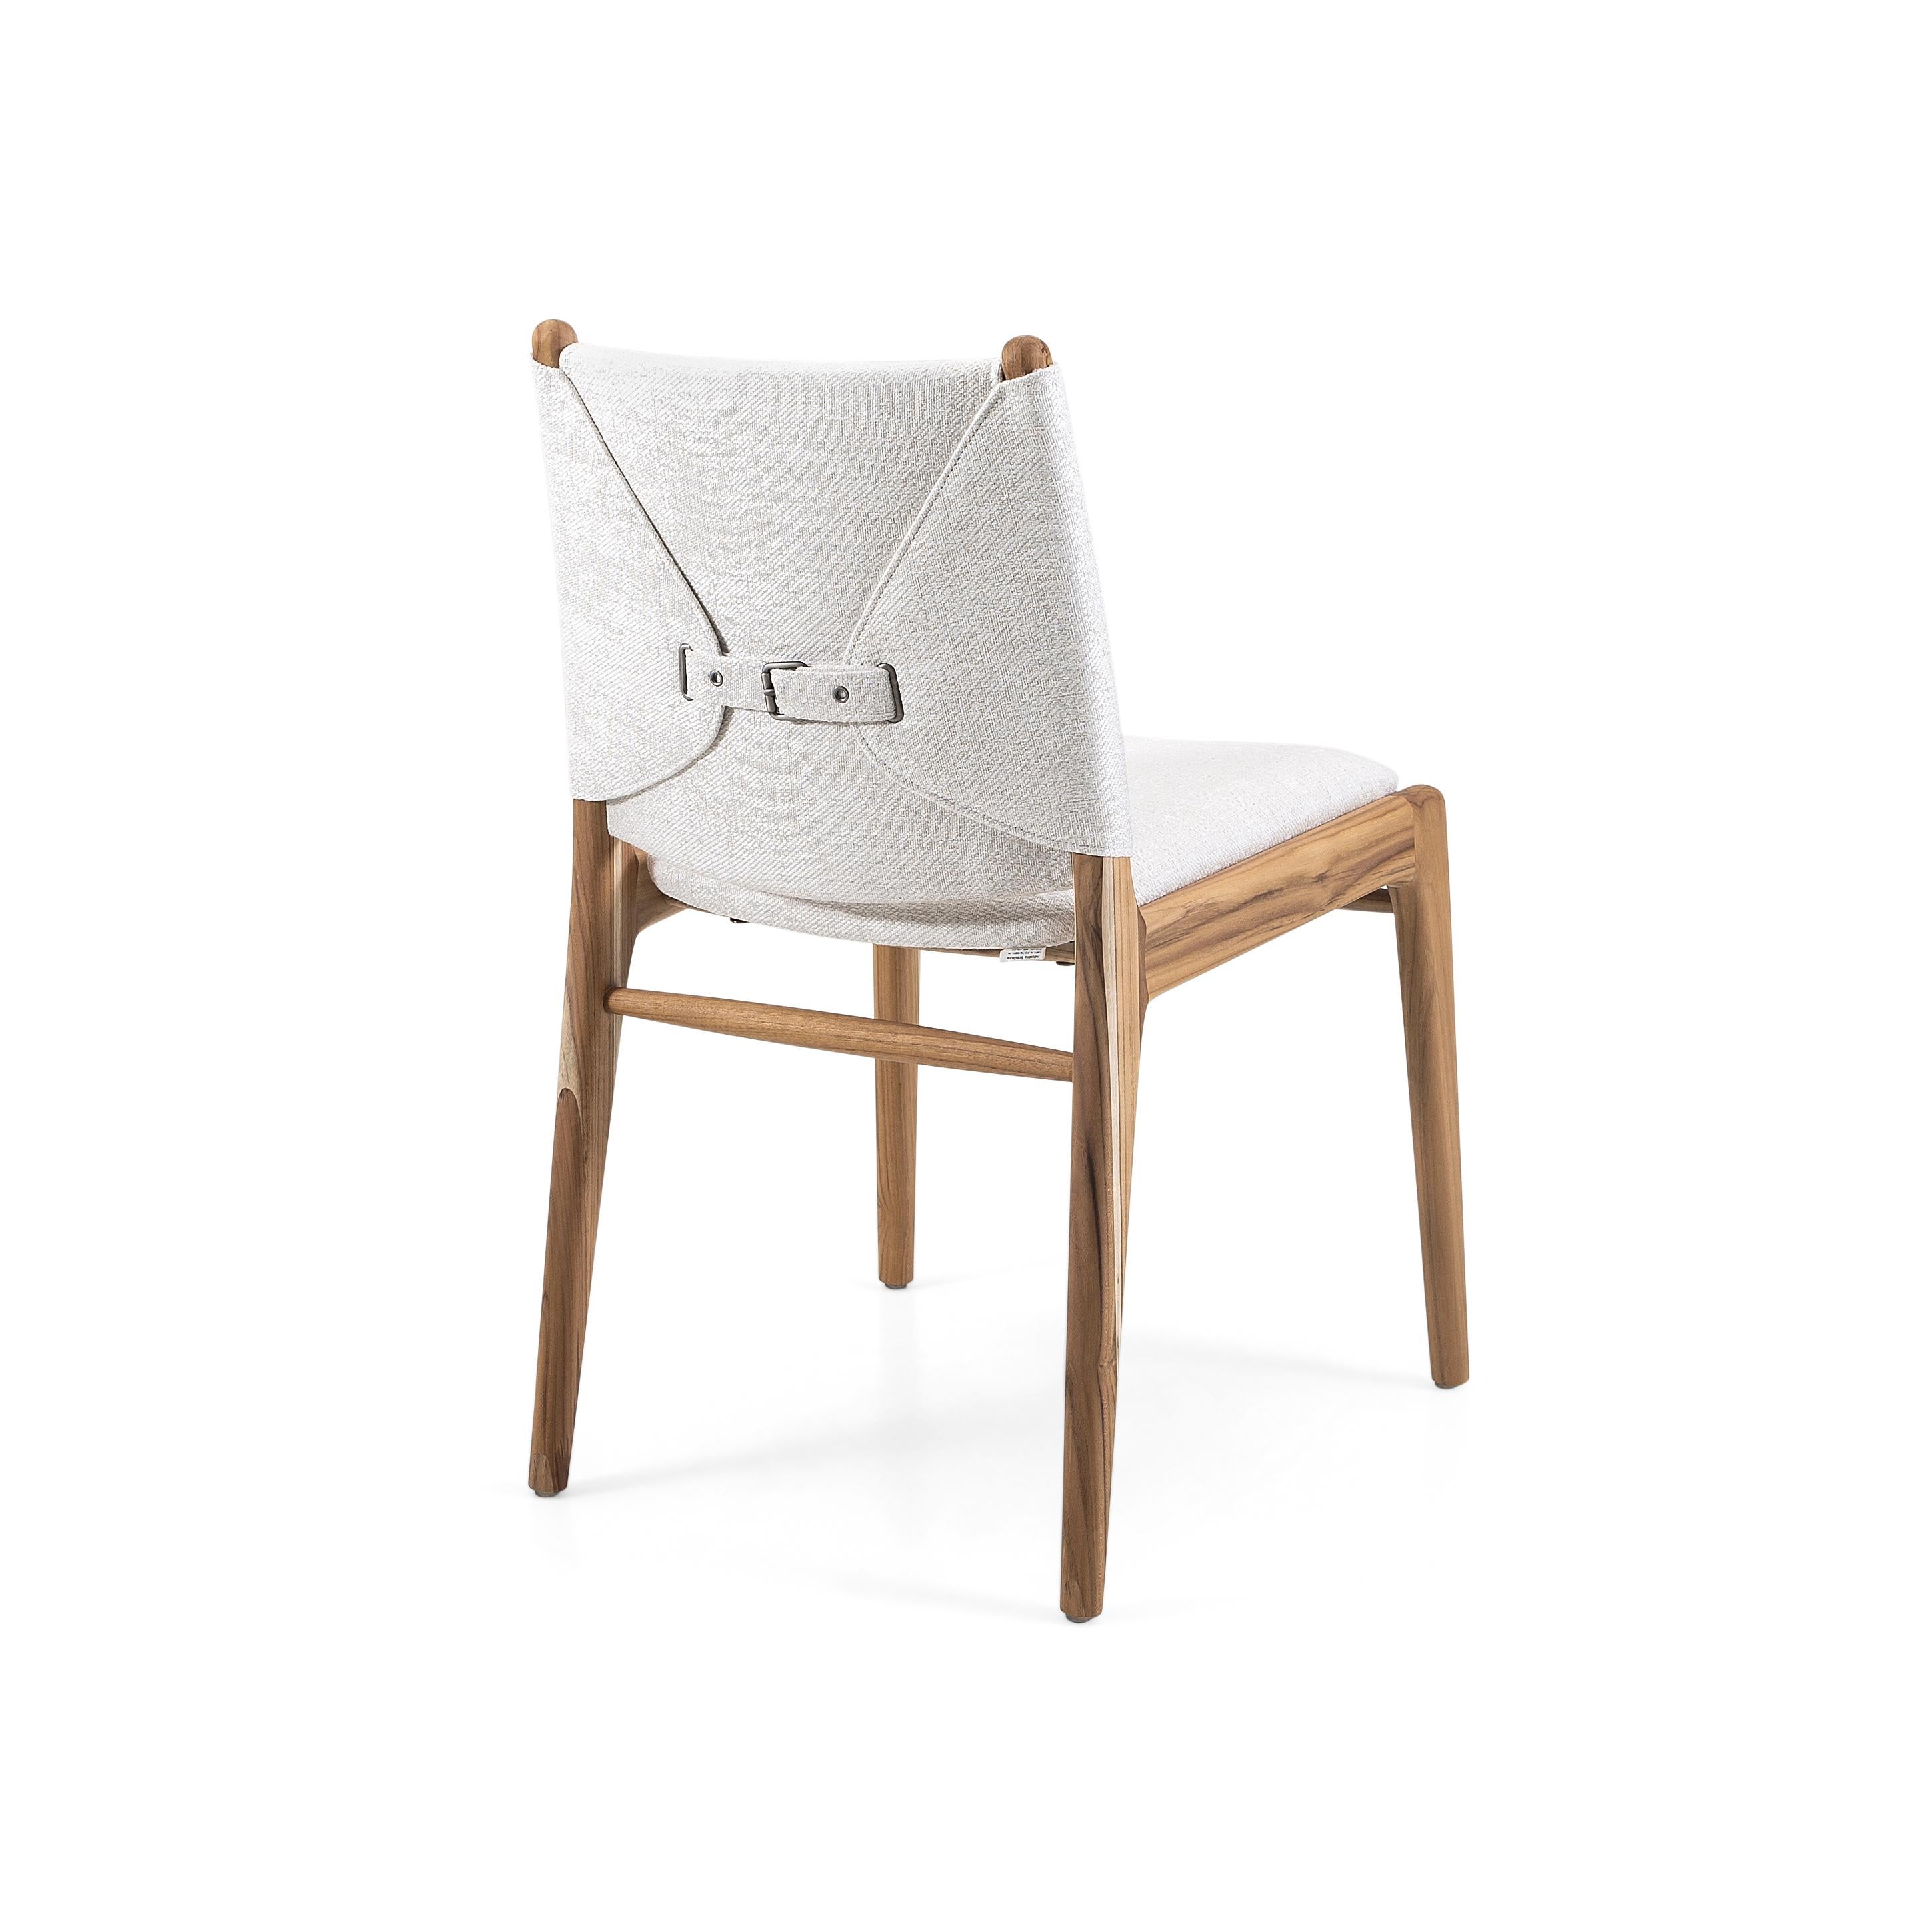 Contemporary Cappio Dining Chair in Teak Wood and Light Beige Fabric, set of 2 For Sale